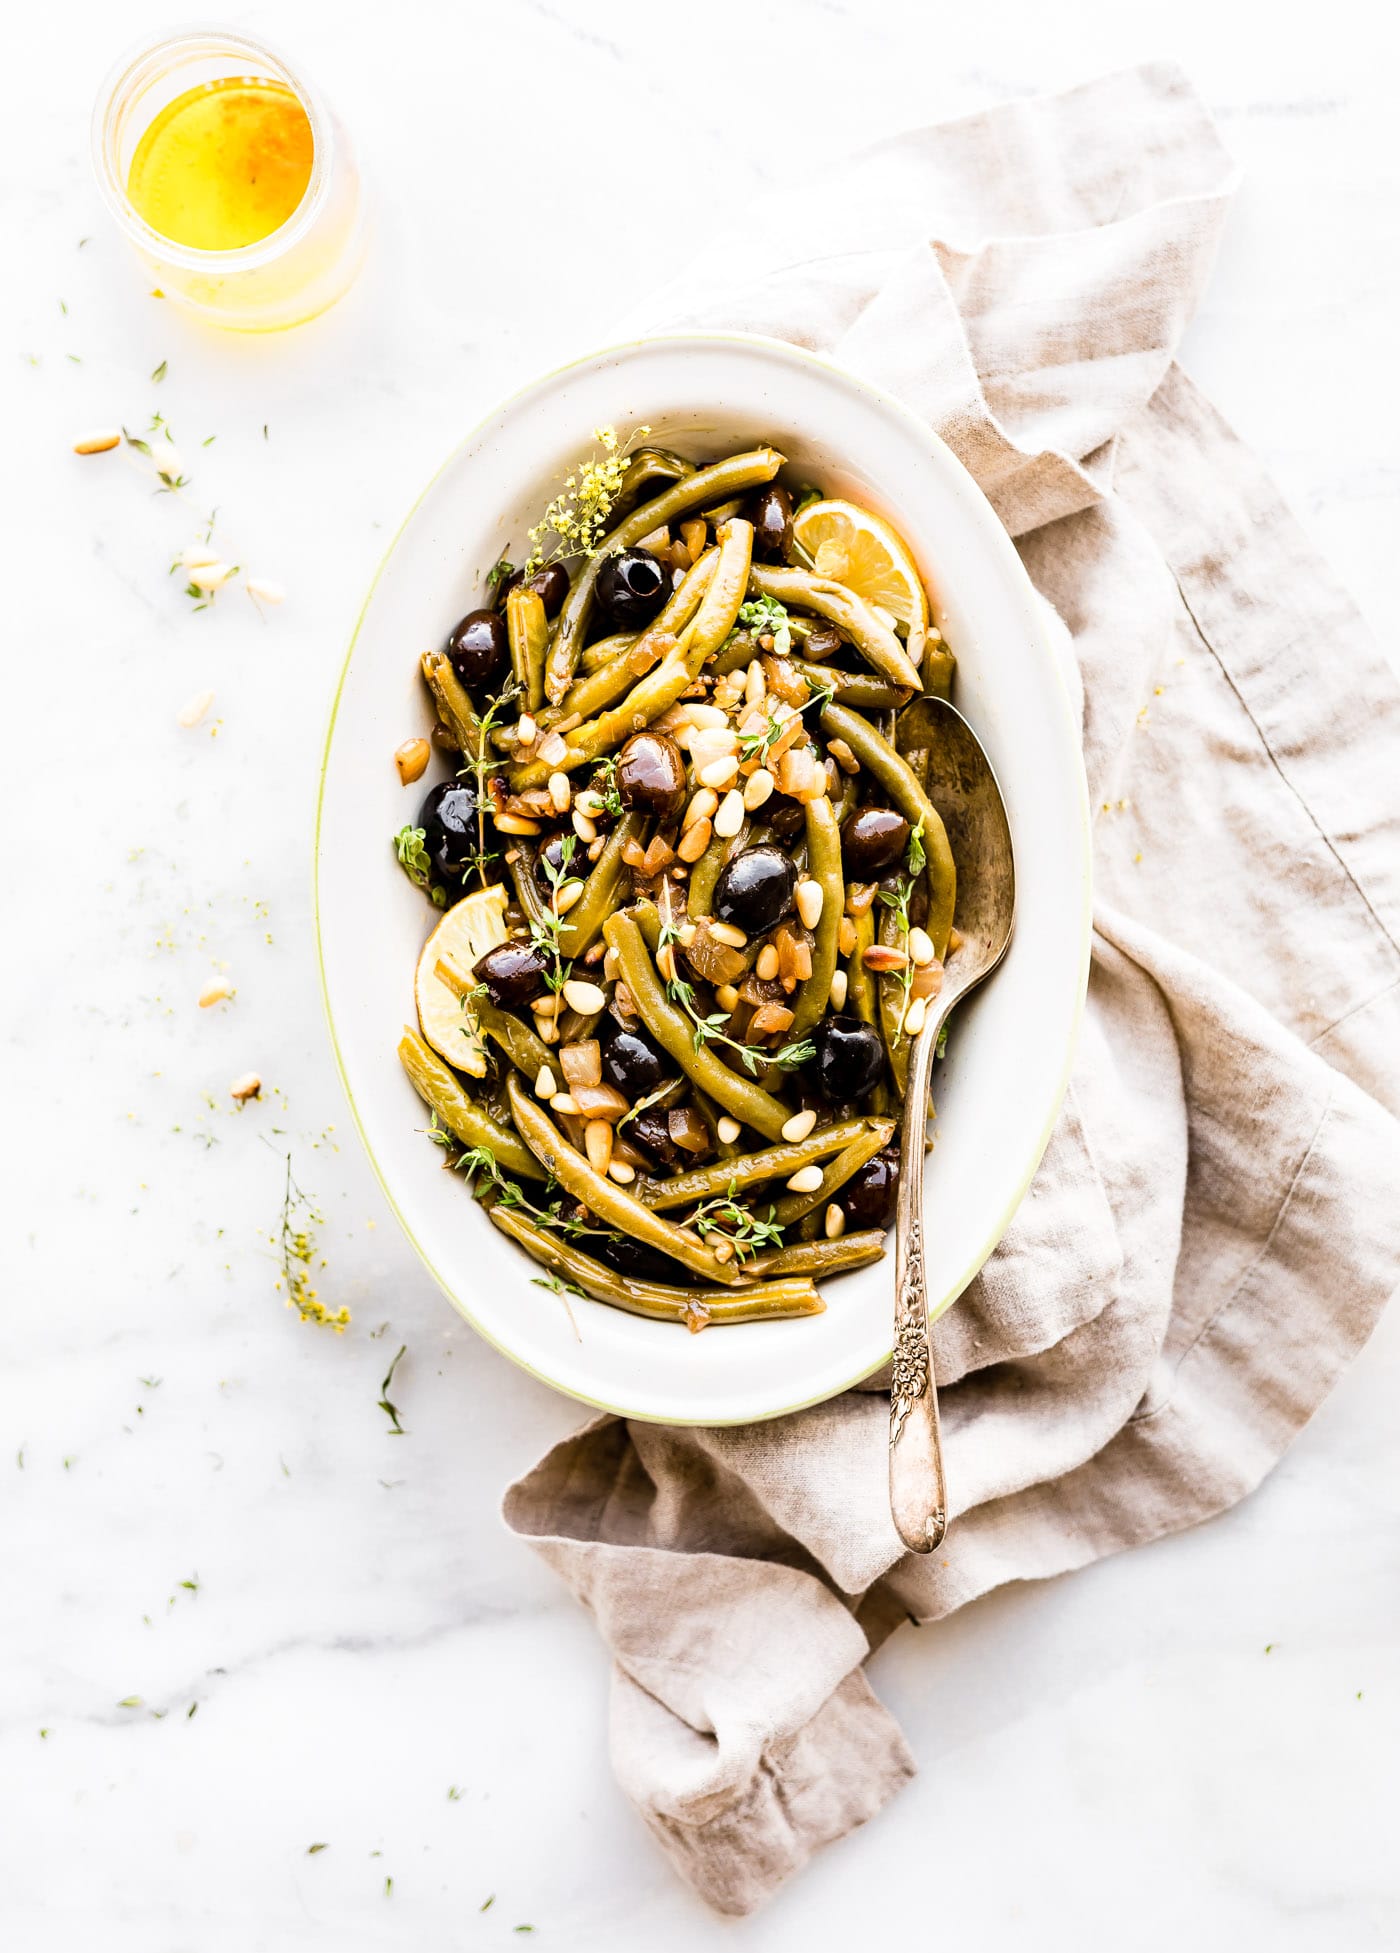 Balsamic Olive-Oil braised green Beans with a quick, easy, and healthy side dish. For this braised green beans recipe, fresh green beans are seasoned with thyme, then braised with balsamic vinegar, olive-oil, onion, black olives, and topped with toasted pine nuts. Paleo, whole 30, and vegan friendly.